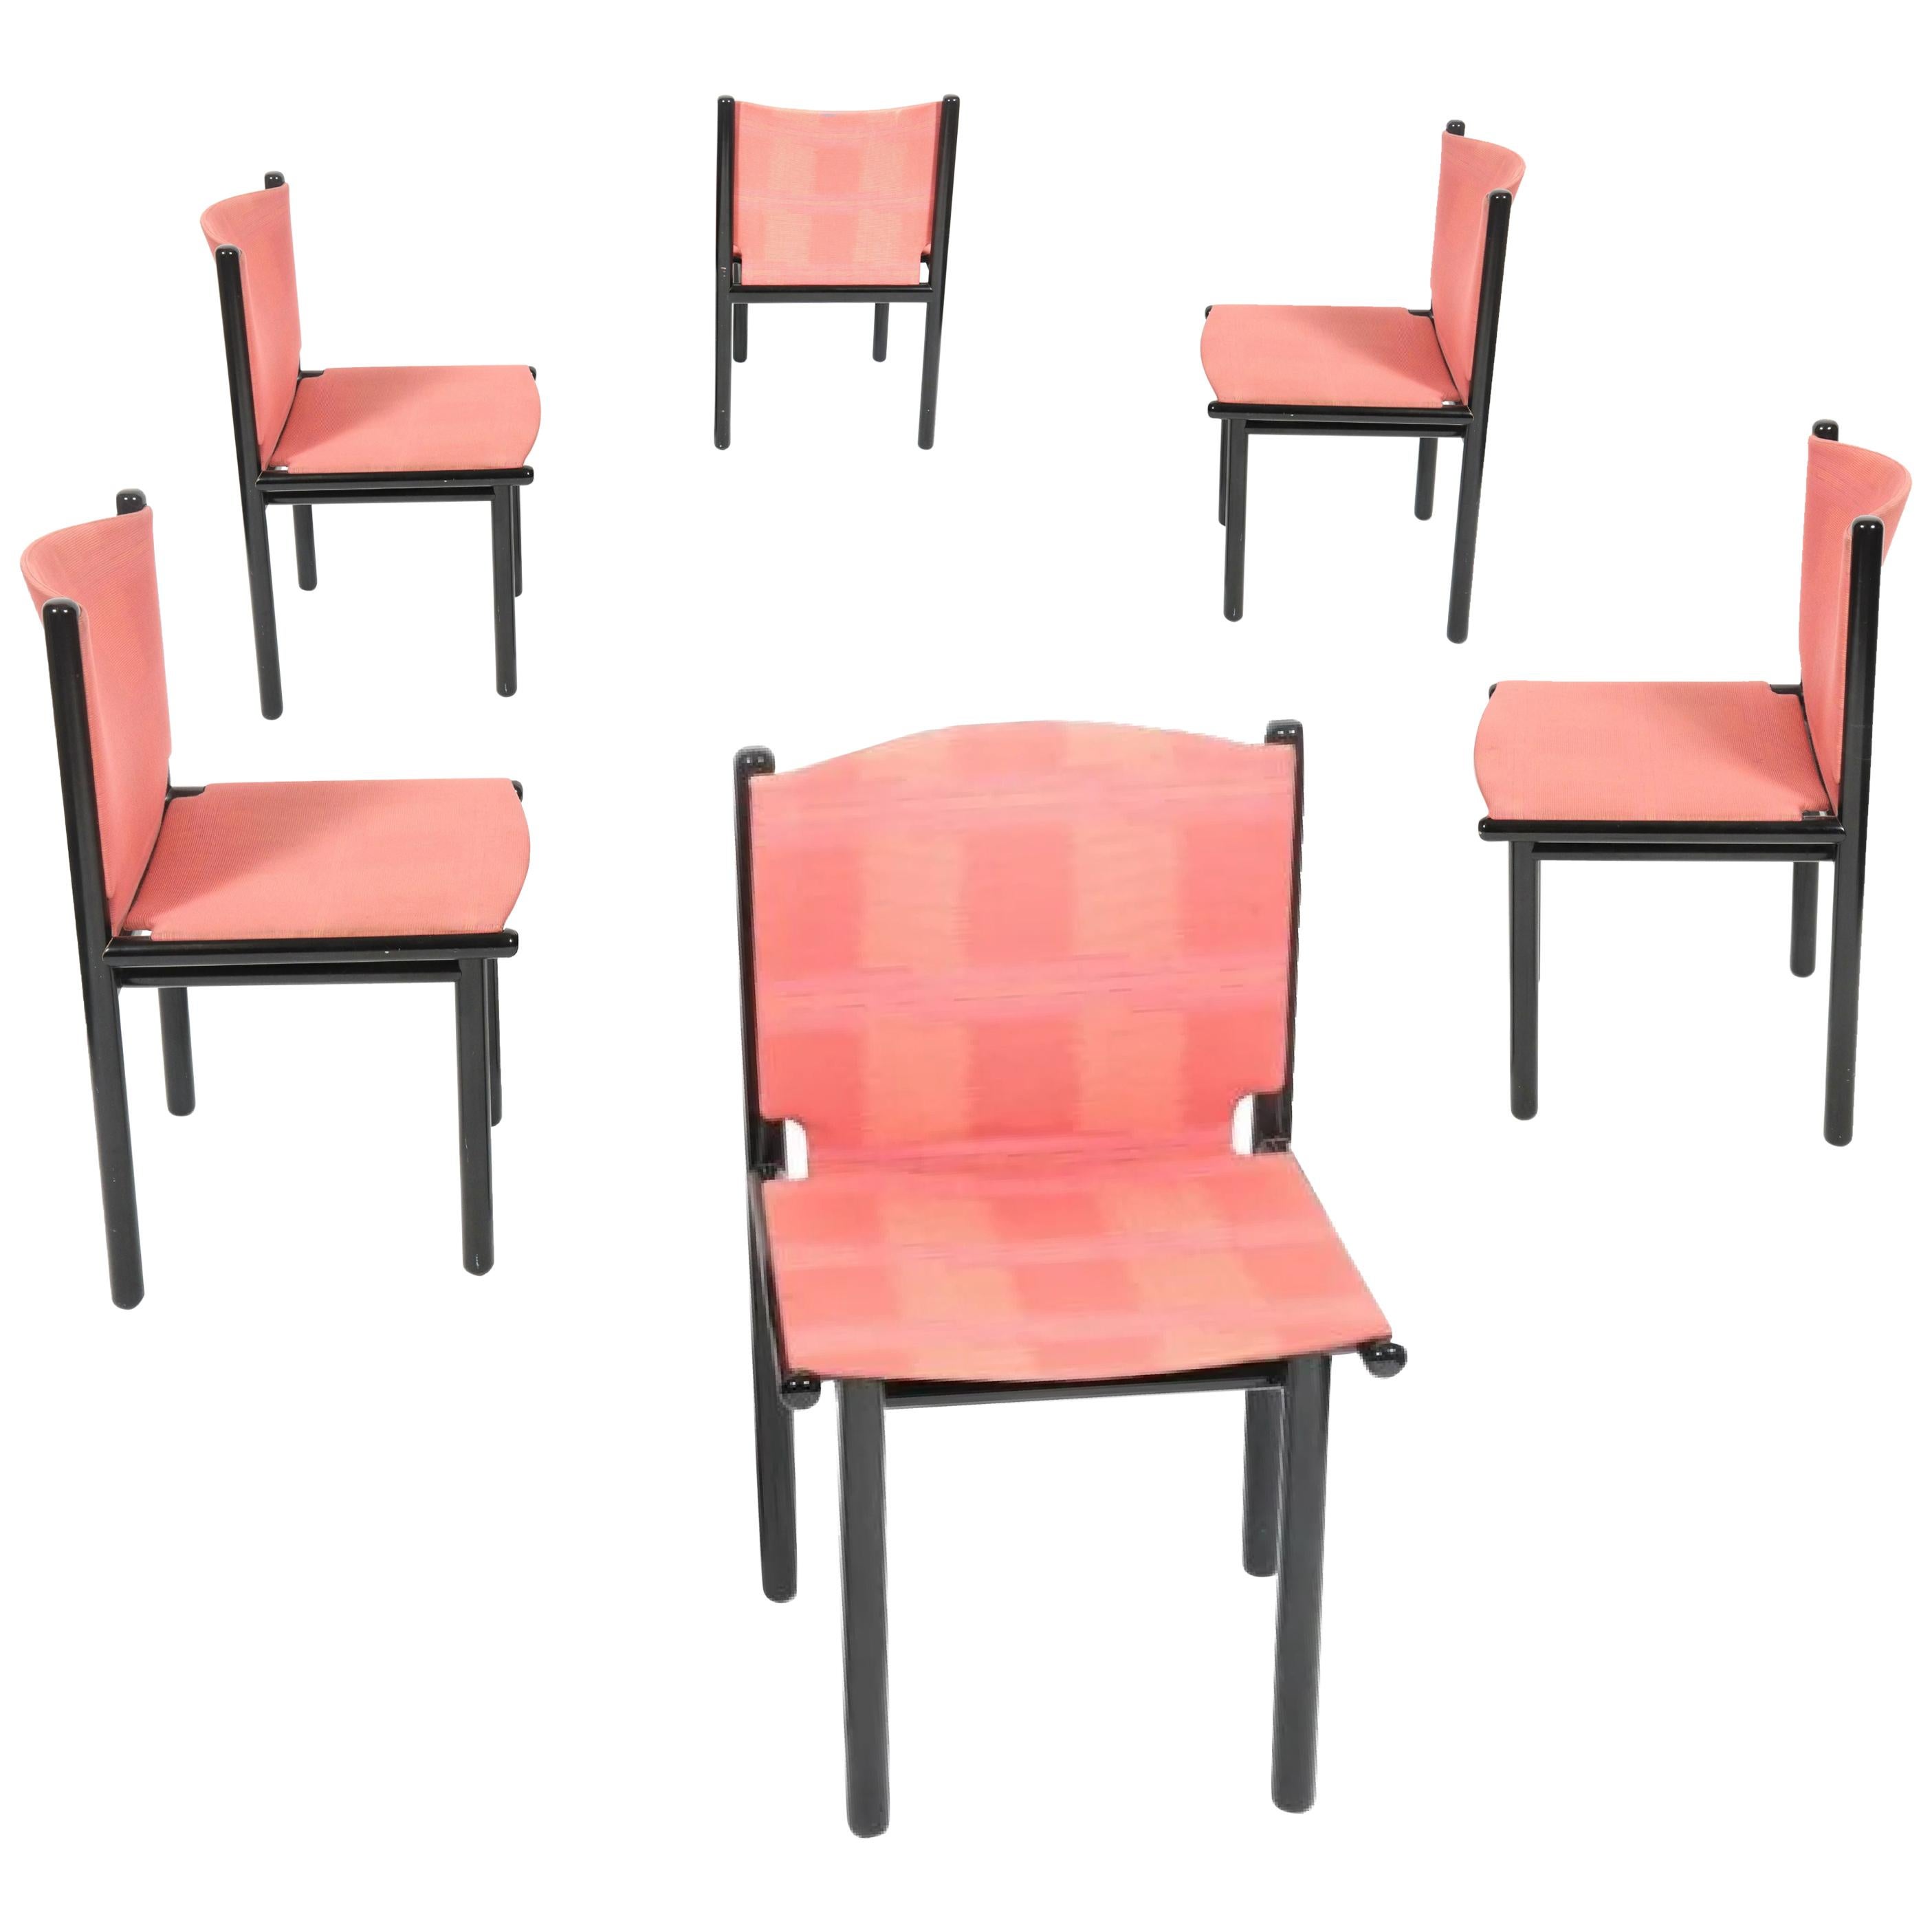 Gianfranco Frattini for Cassina Dining Chair, Black Lacquered Frame, Pink, 1985